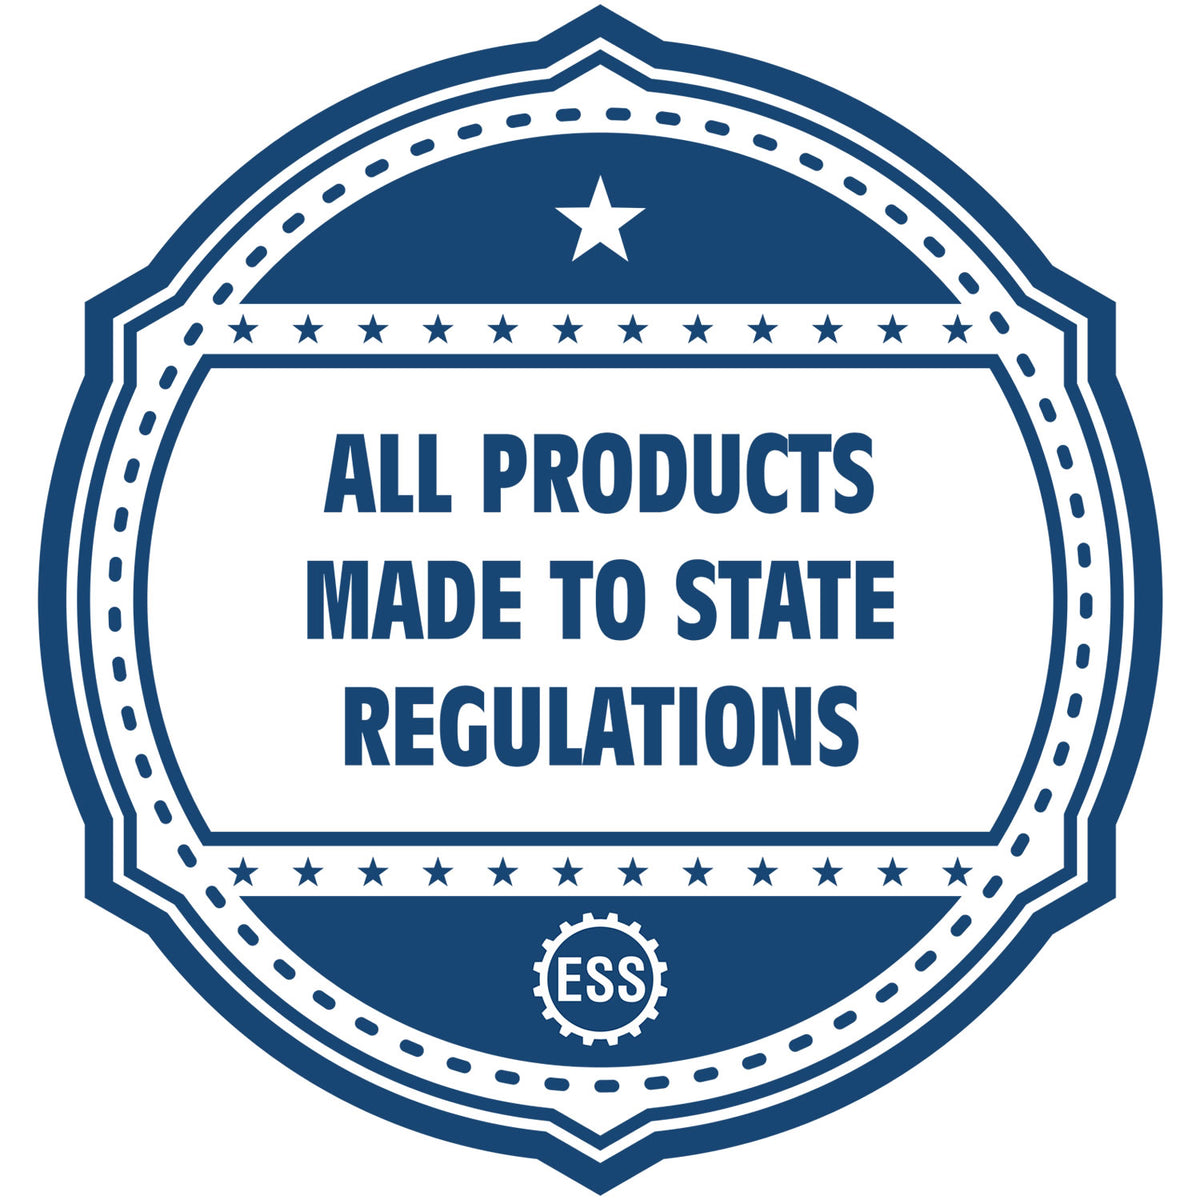 An icon or badge element for the Soft Pocket West Virginia Landscape Architect Embosser showing that this product is made in compliance with state regulations.